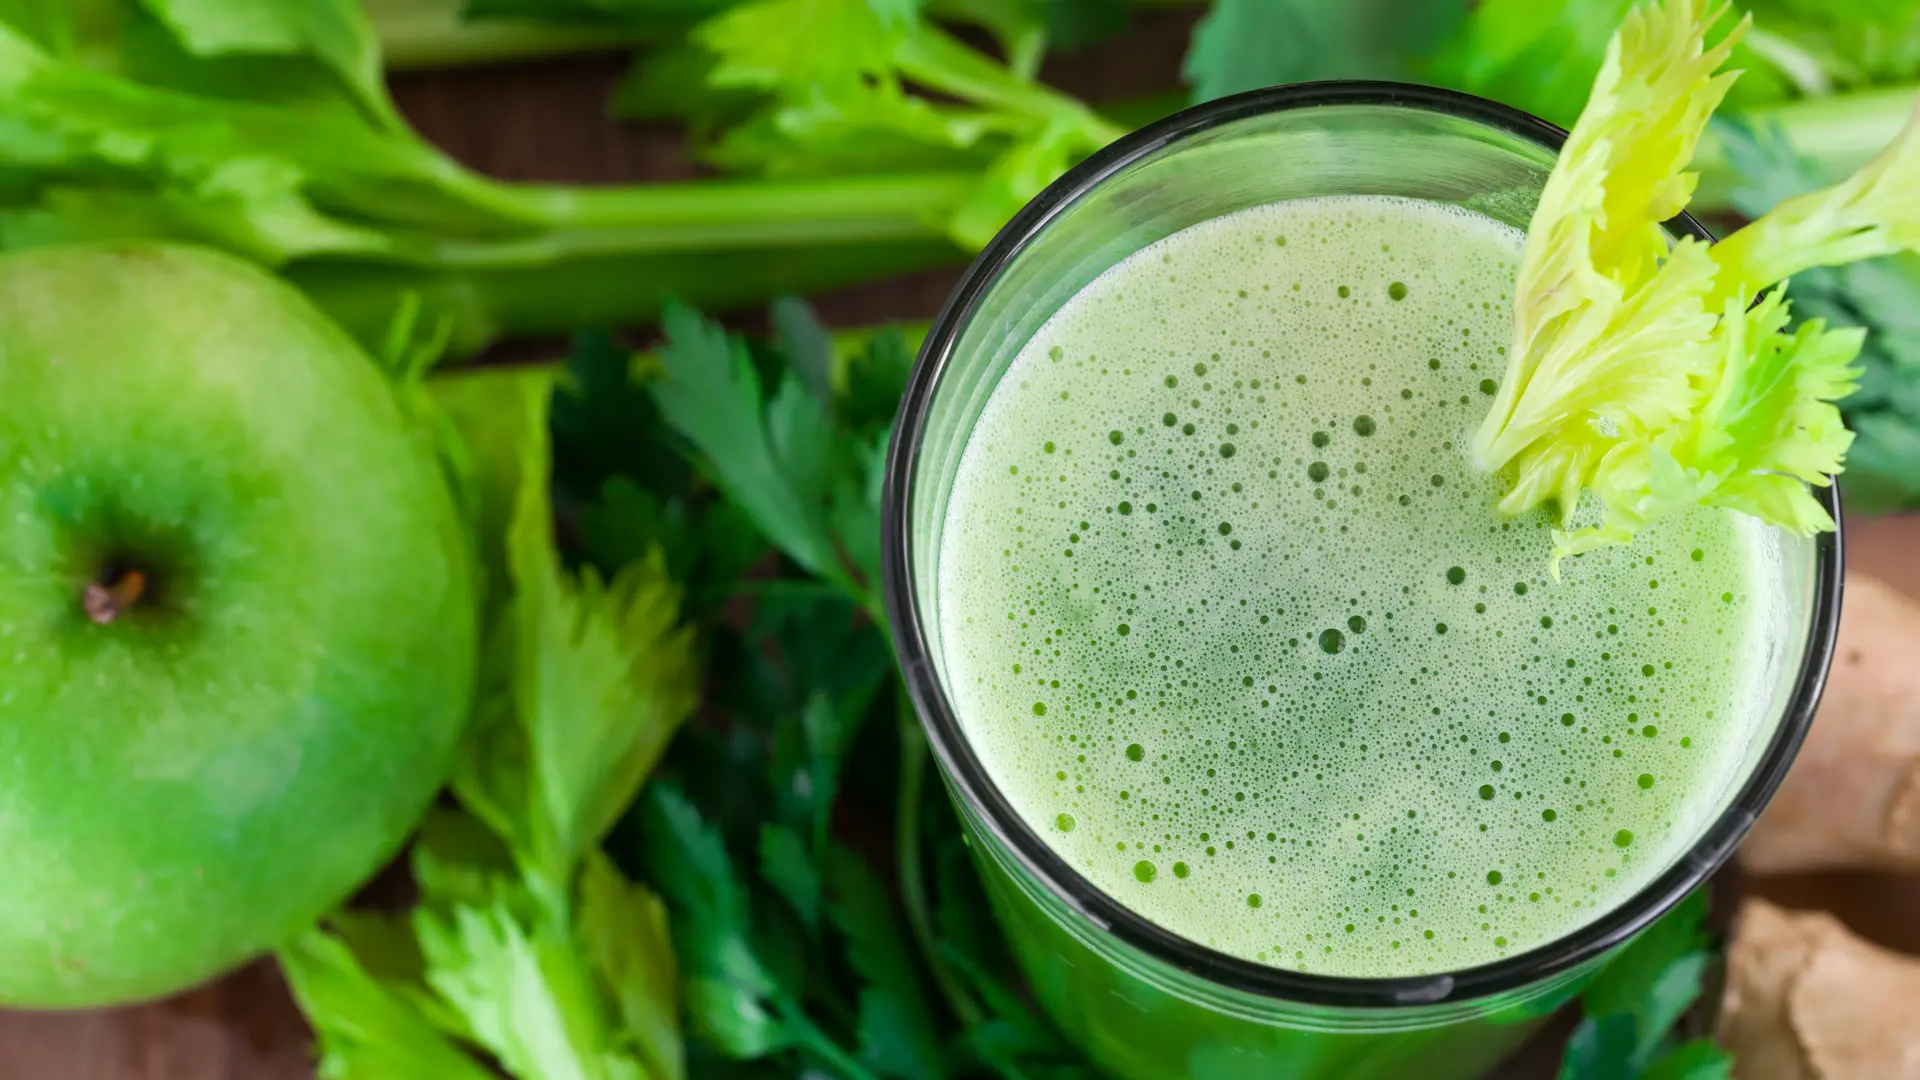 Is Celery Juicing for You